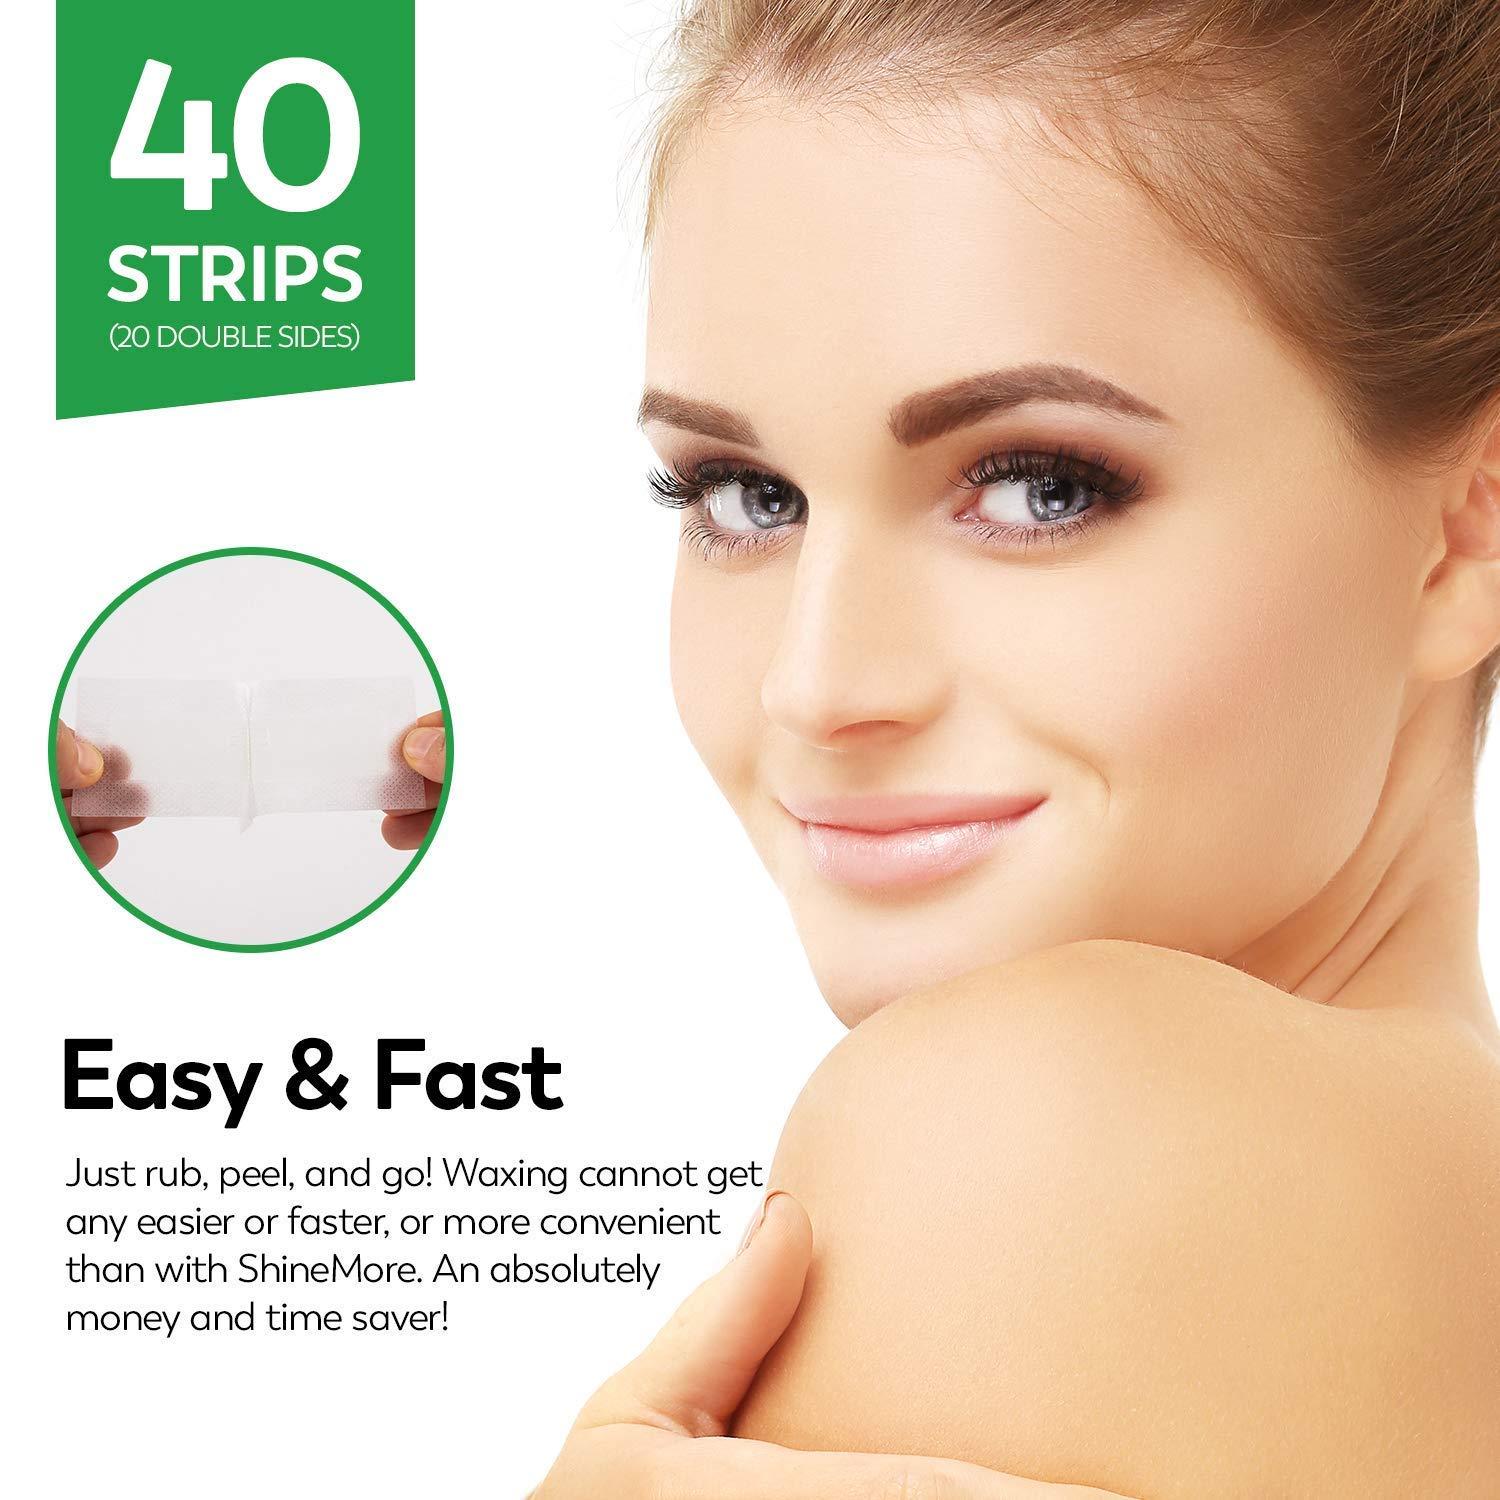 Facial Wax Strips - Hypoallergenic All Skin Types - Facial Hair Removal For  Women - Gentle and Fast-Working for Face, Eyebrow, Upper Lip, Chin (40 Wax  Strips + 4 Calming Oil Wipes) Green